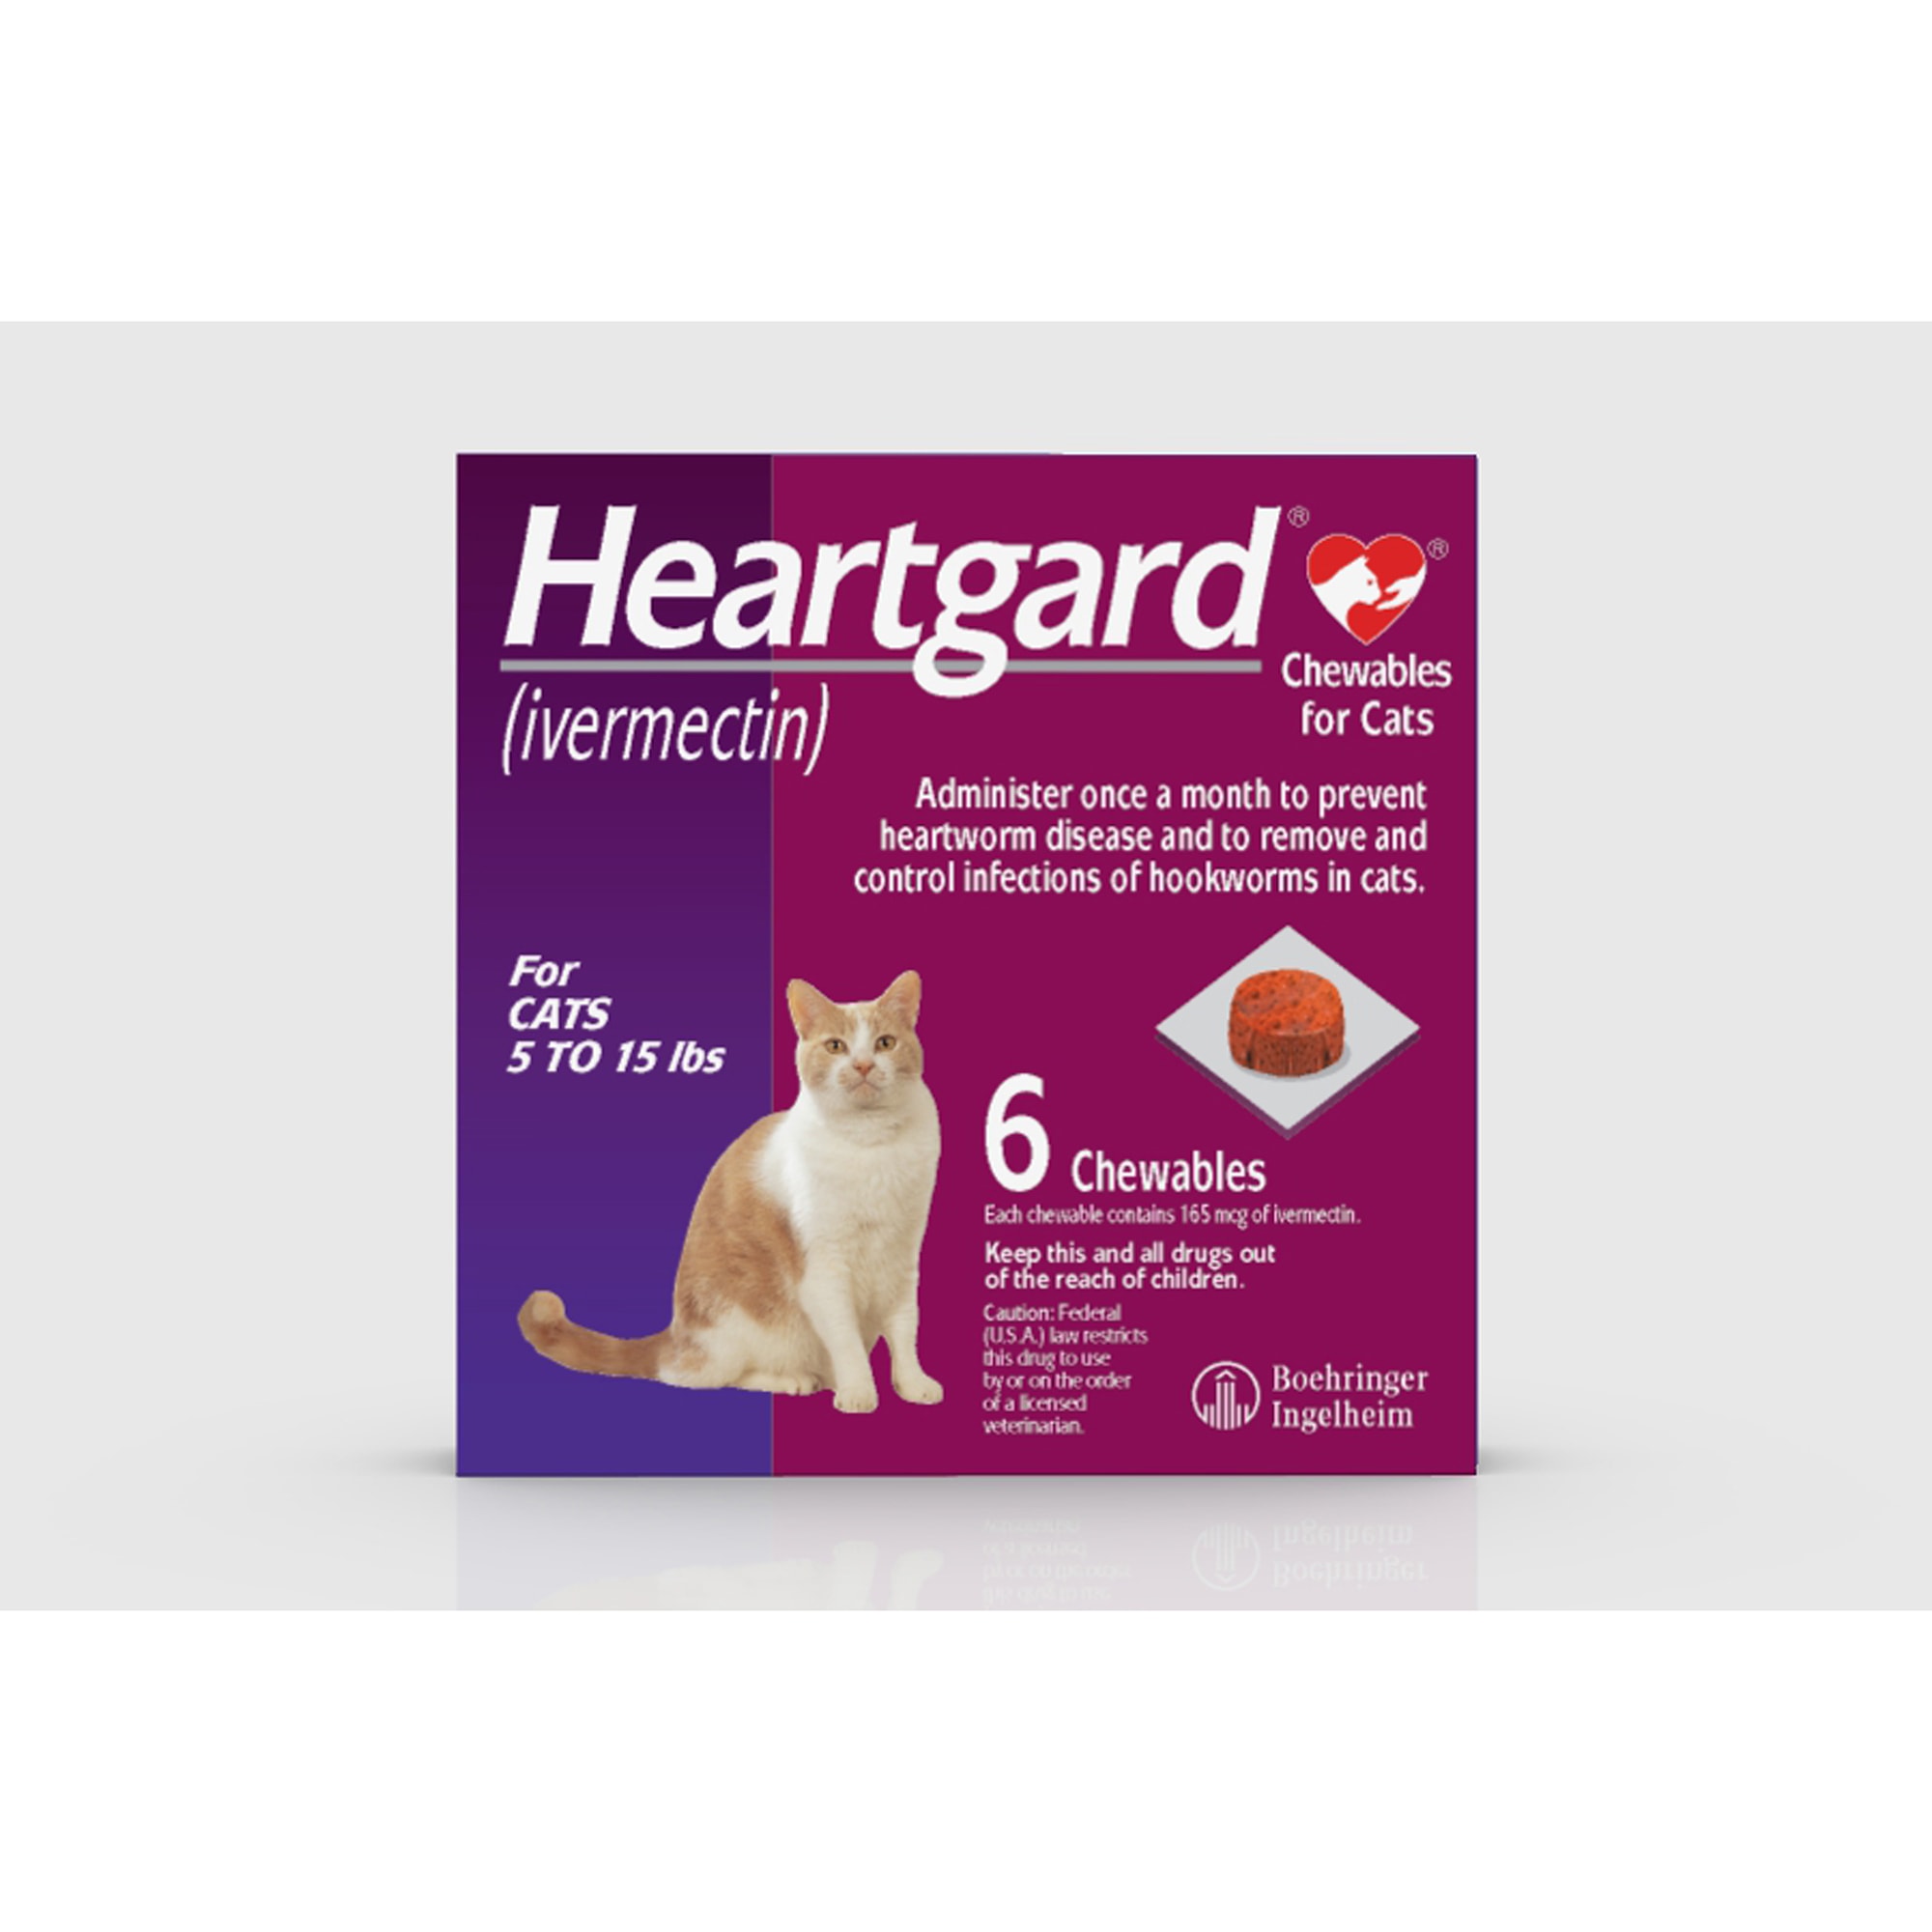 Heartgard Chewables for Cats 5 to 15 lbs, 6 Month Supply Petco